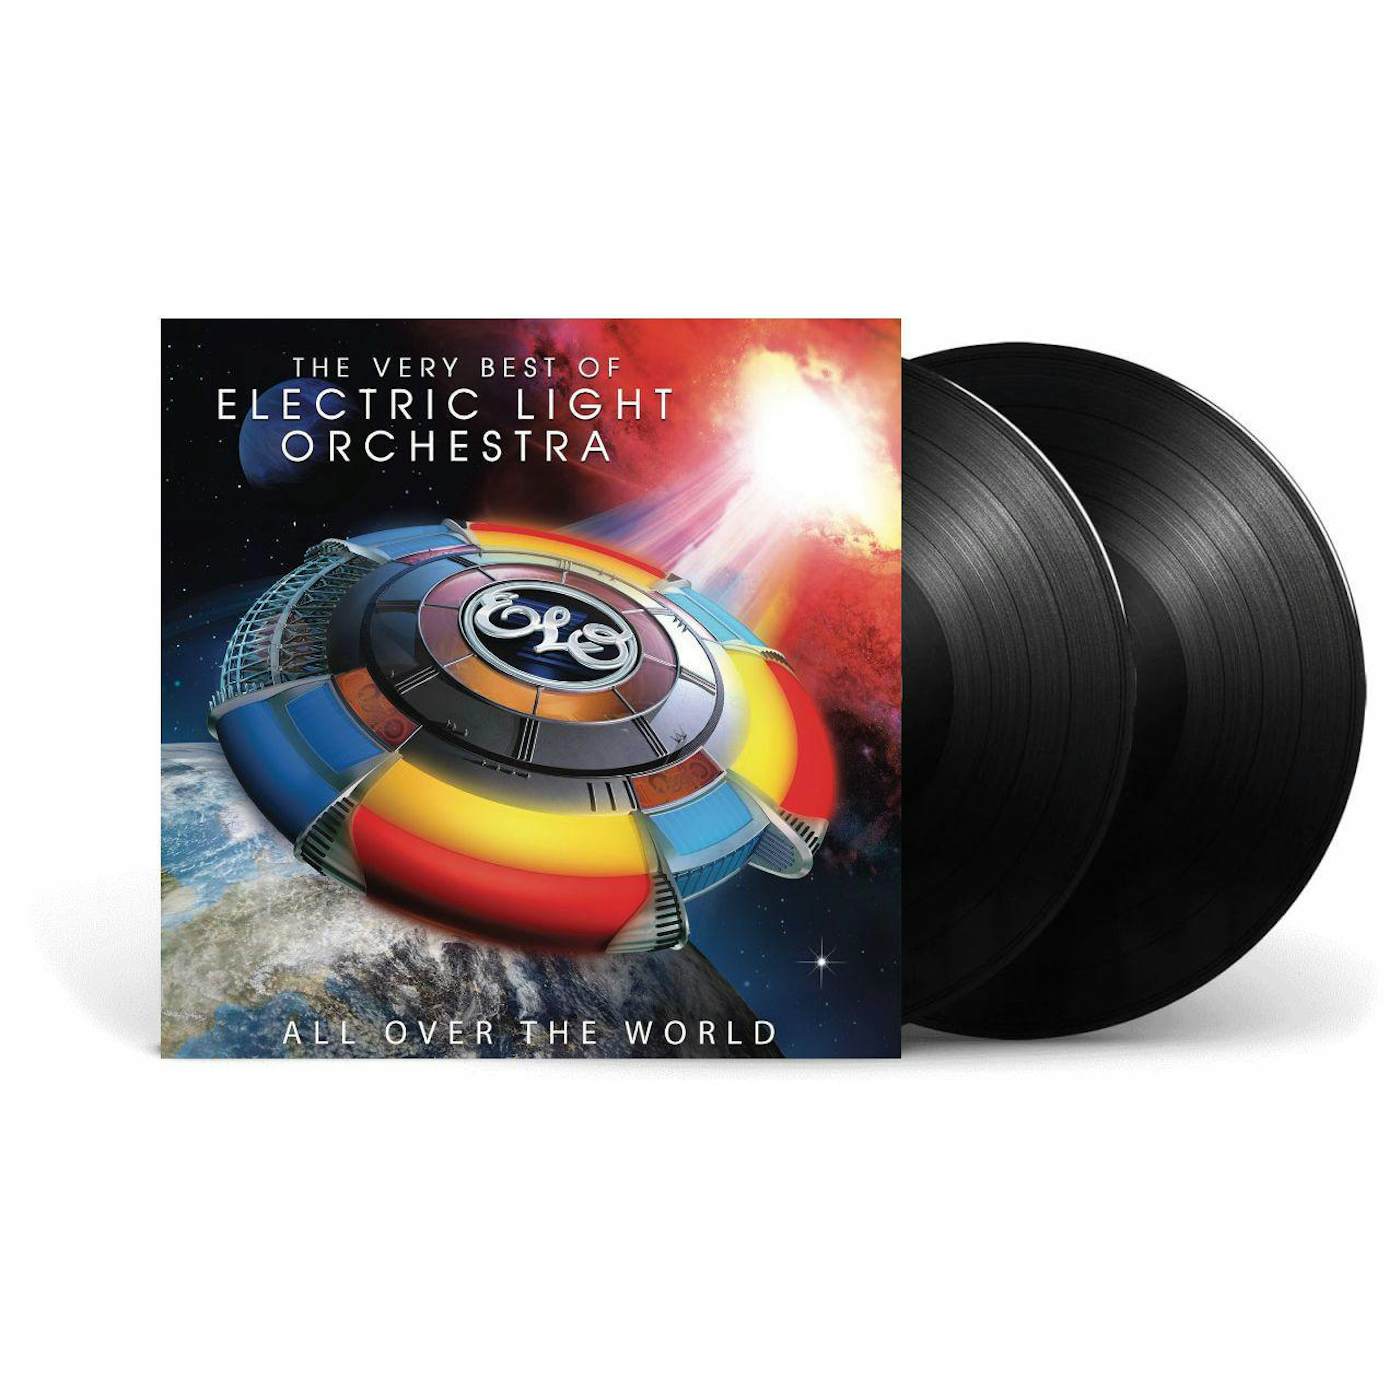 All Over The World: The Very Best Of ELO (Electric Light Orchestra) (2LP) Vinyl Record